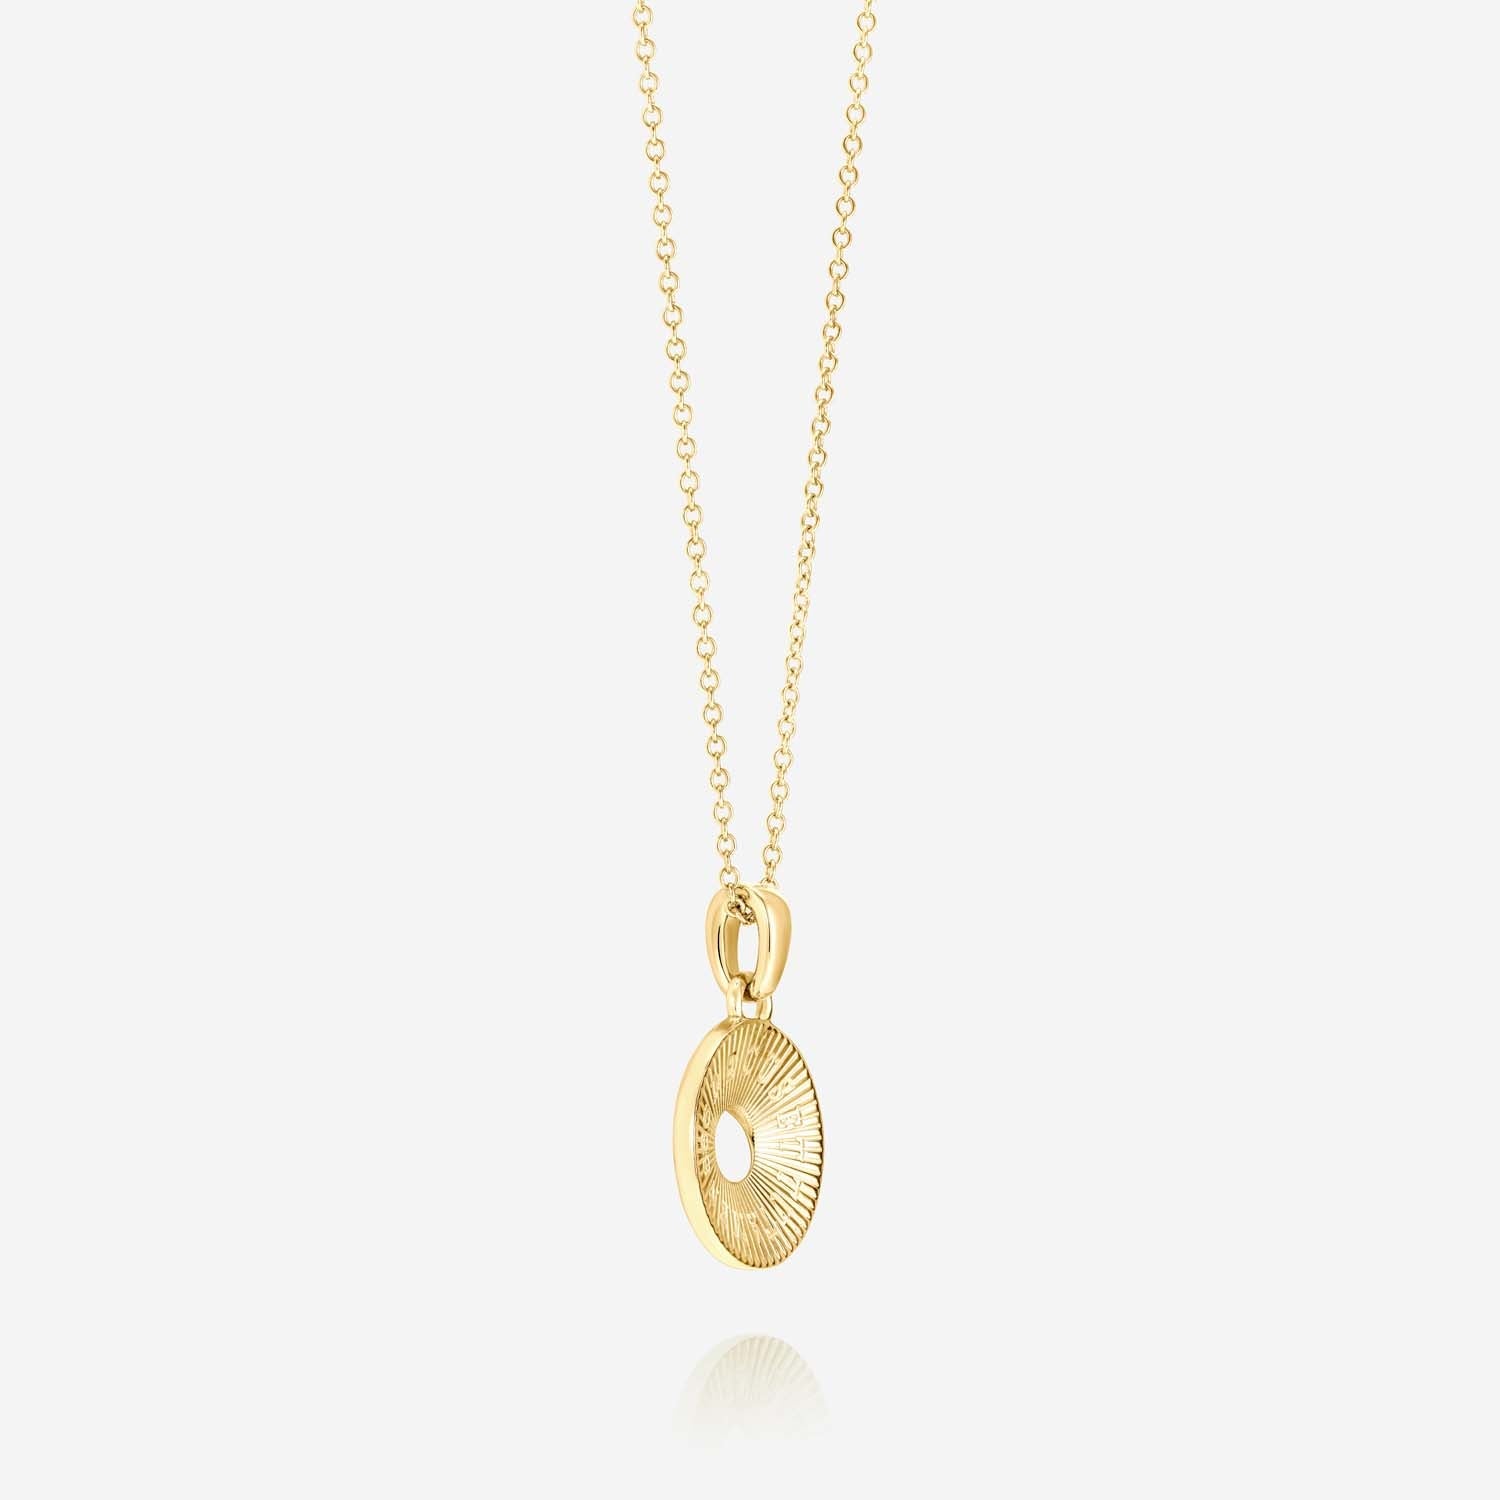 886 Royal Mint Necklaces Tutamen Round Pendant with Chain 18ct Yellow Gold